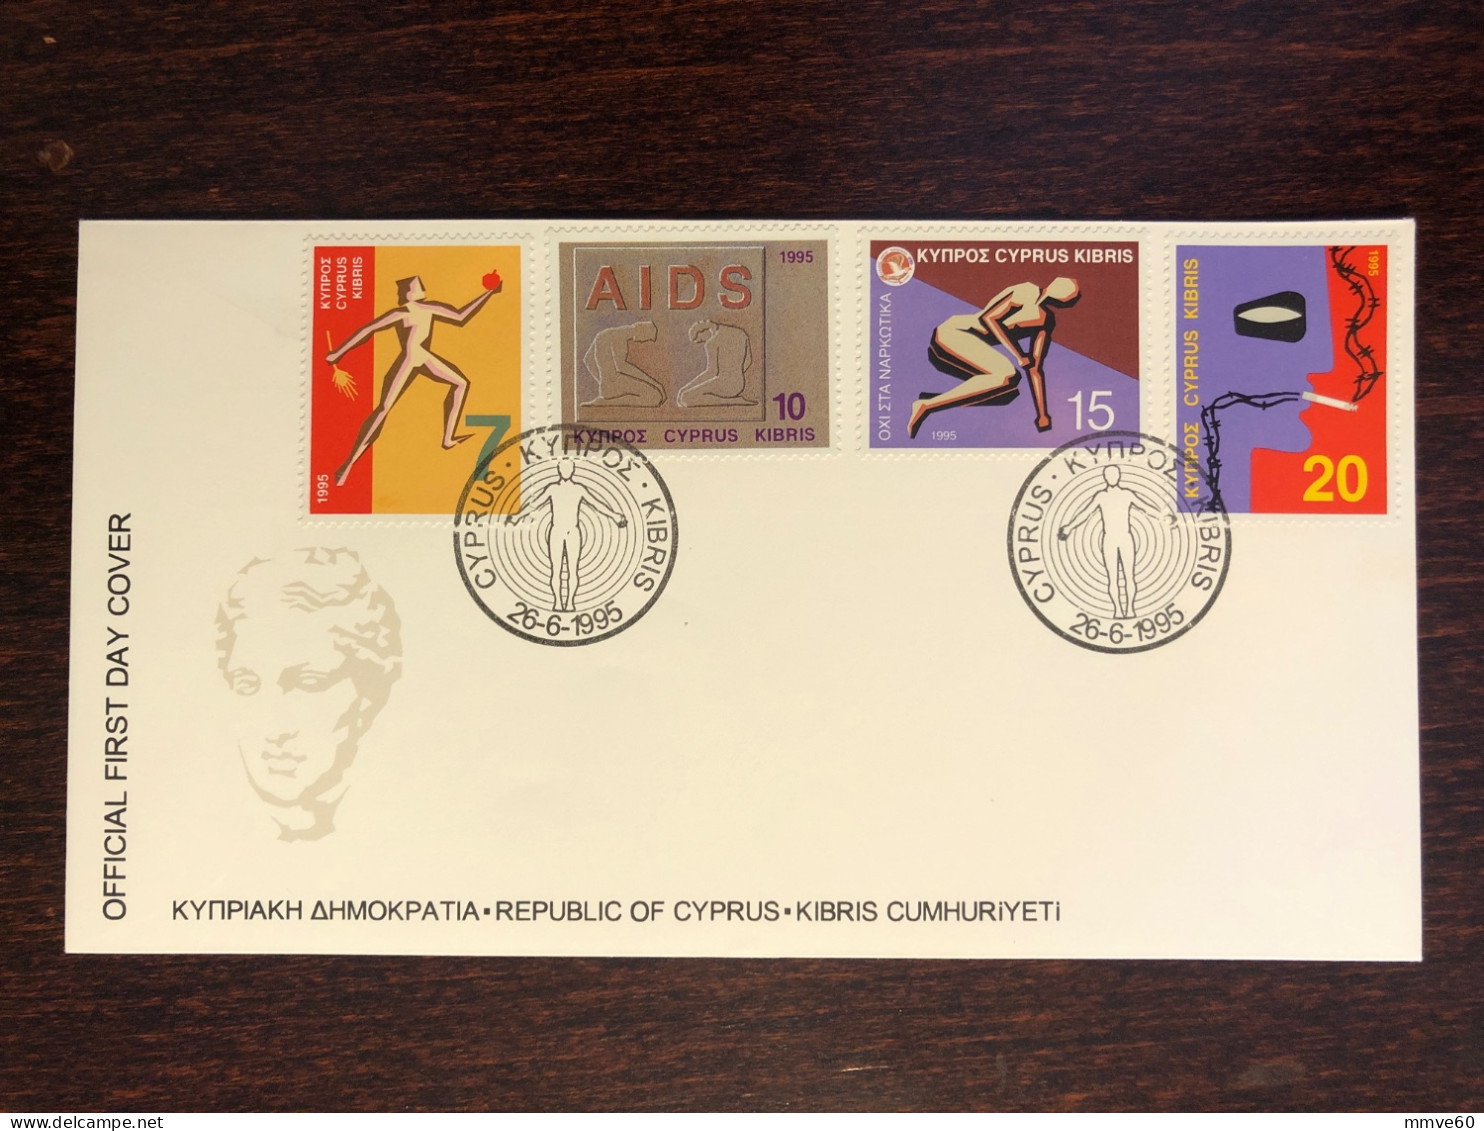 CYPRUS FDC COVER 1995 YEAR AIDS SIDA HEALTH MEDICINE STAMPS - Covers & Documents